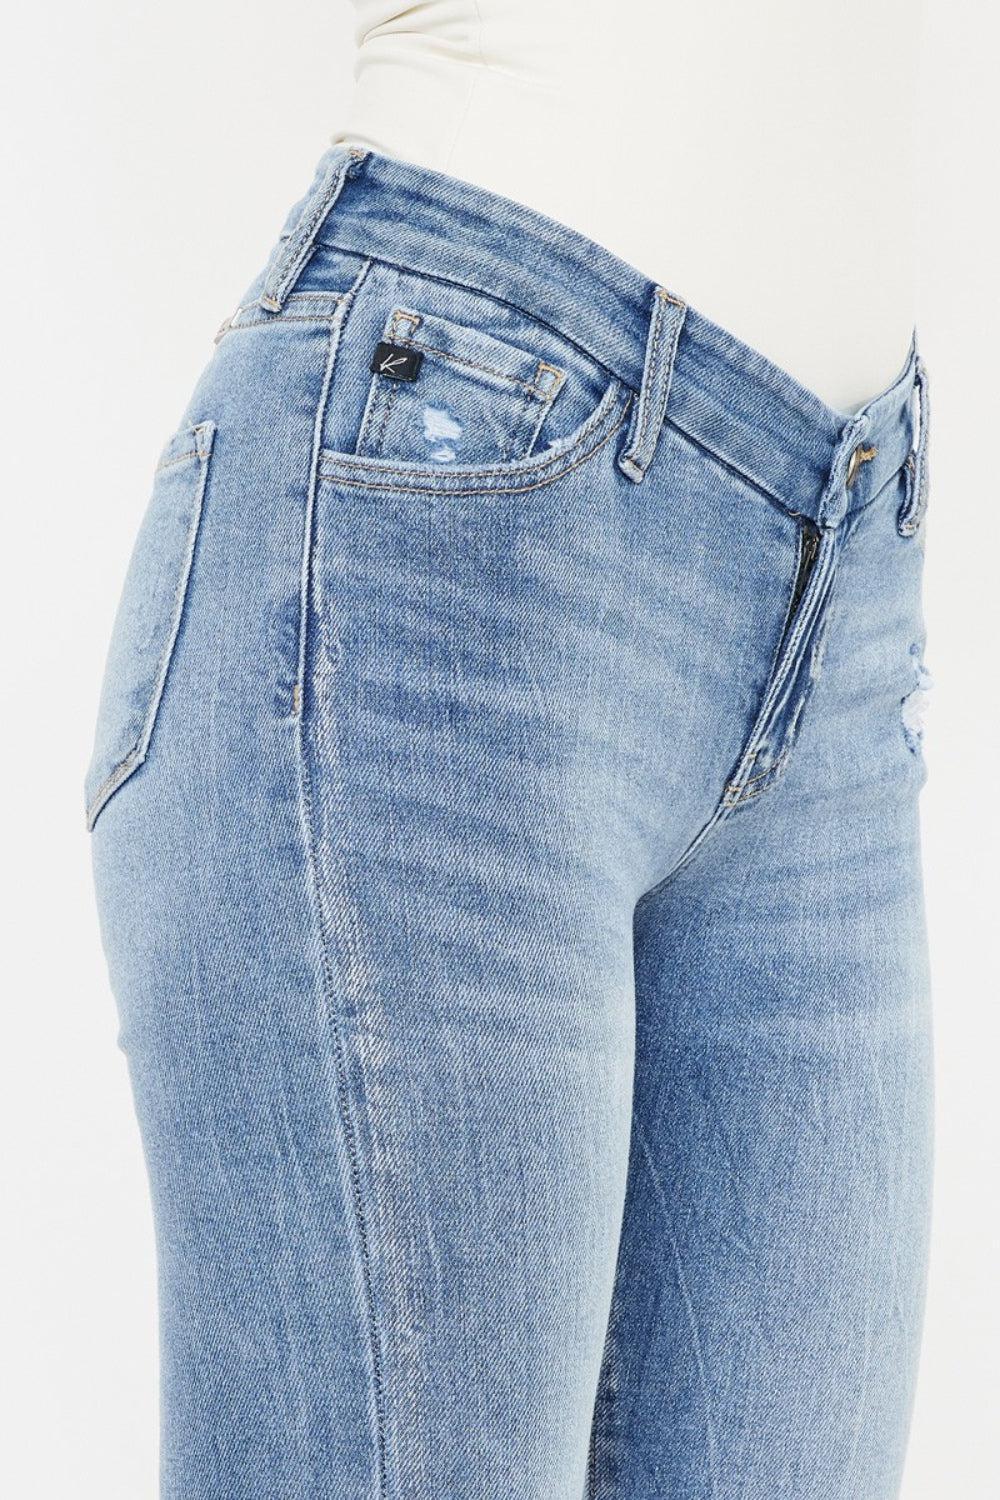 a woman's butt showing the back of her jeans